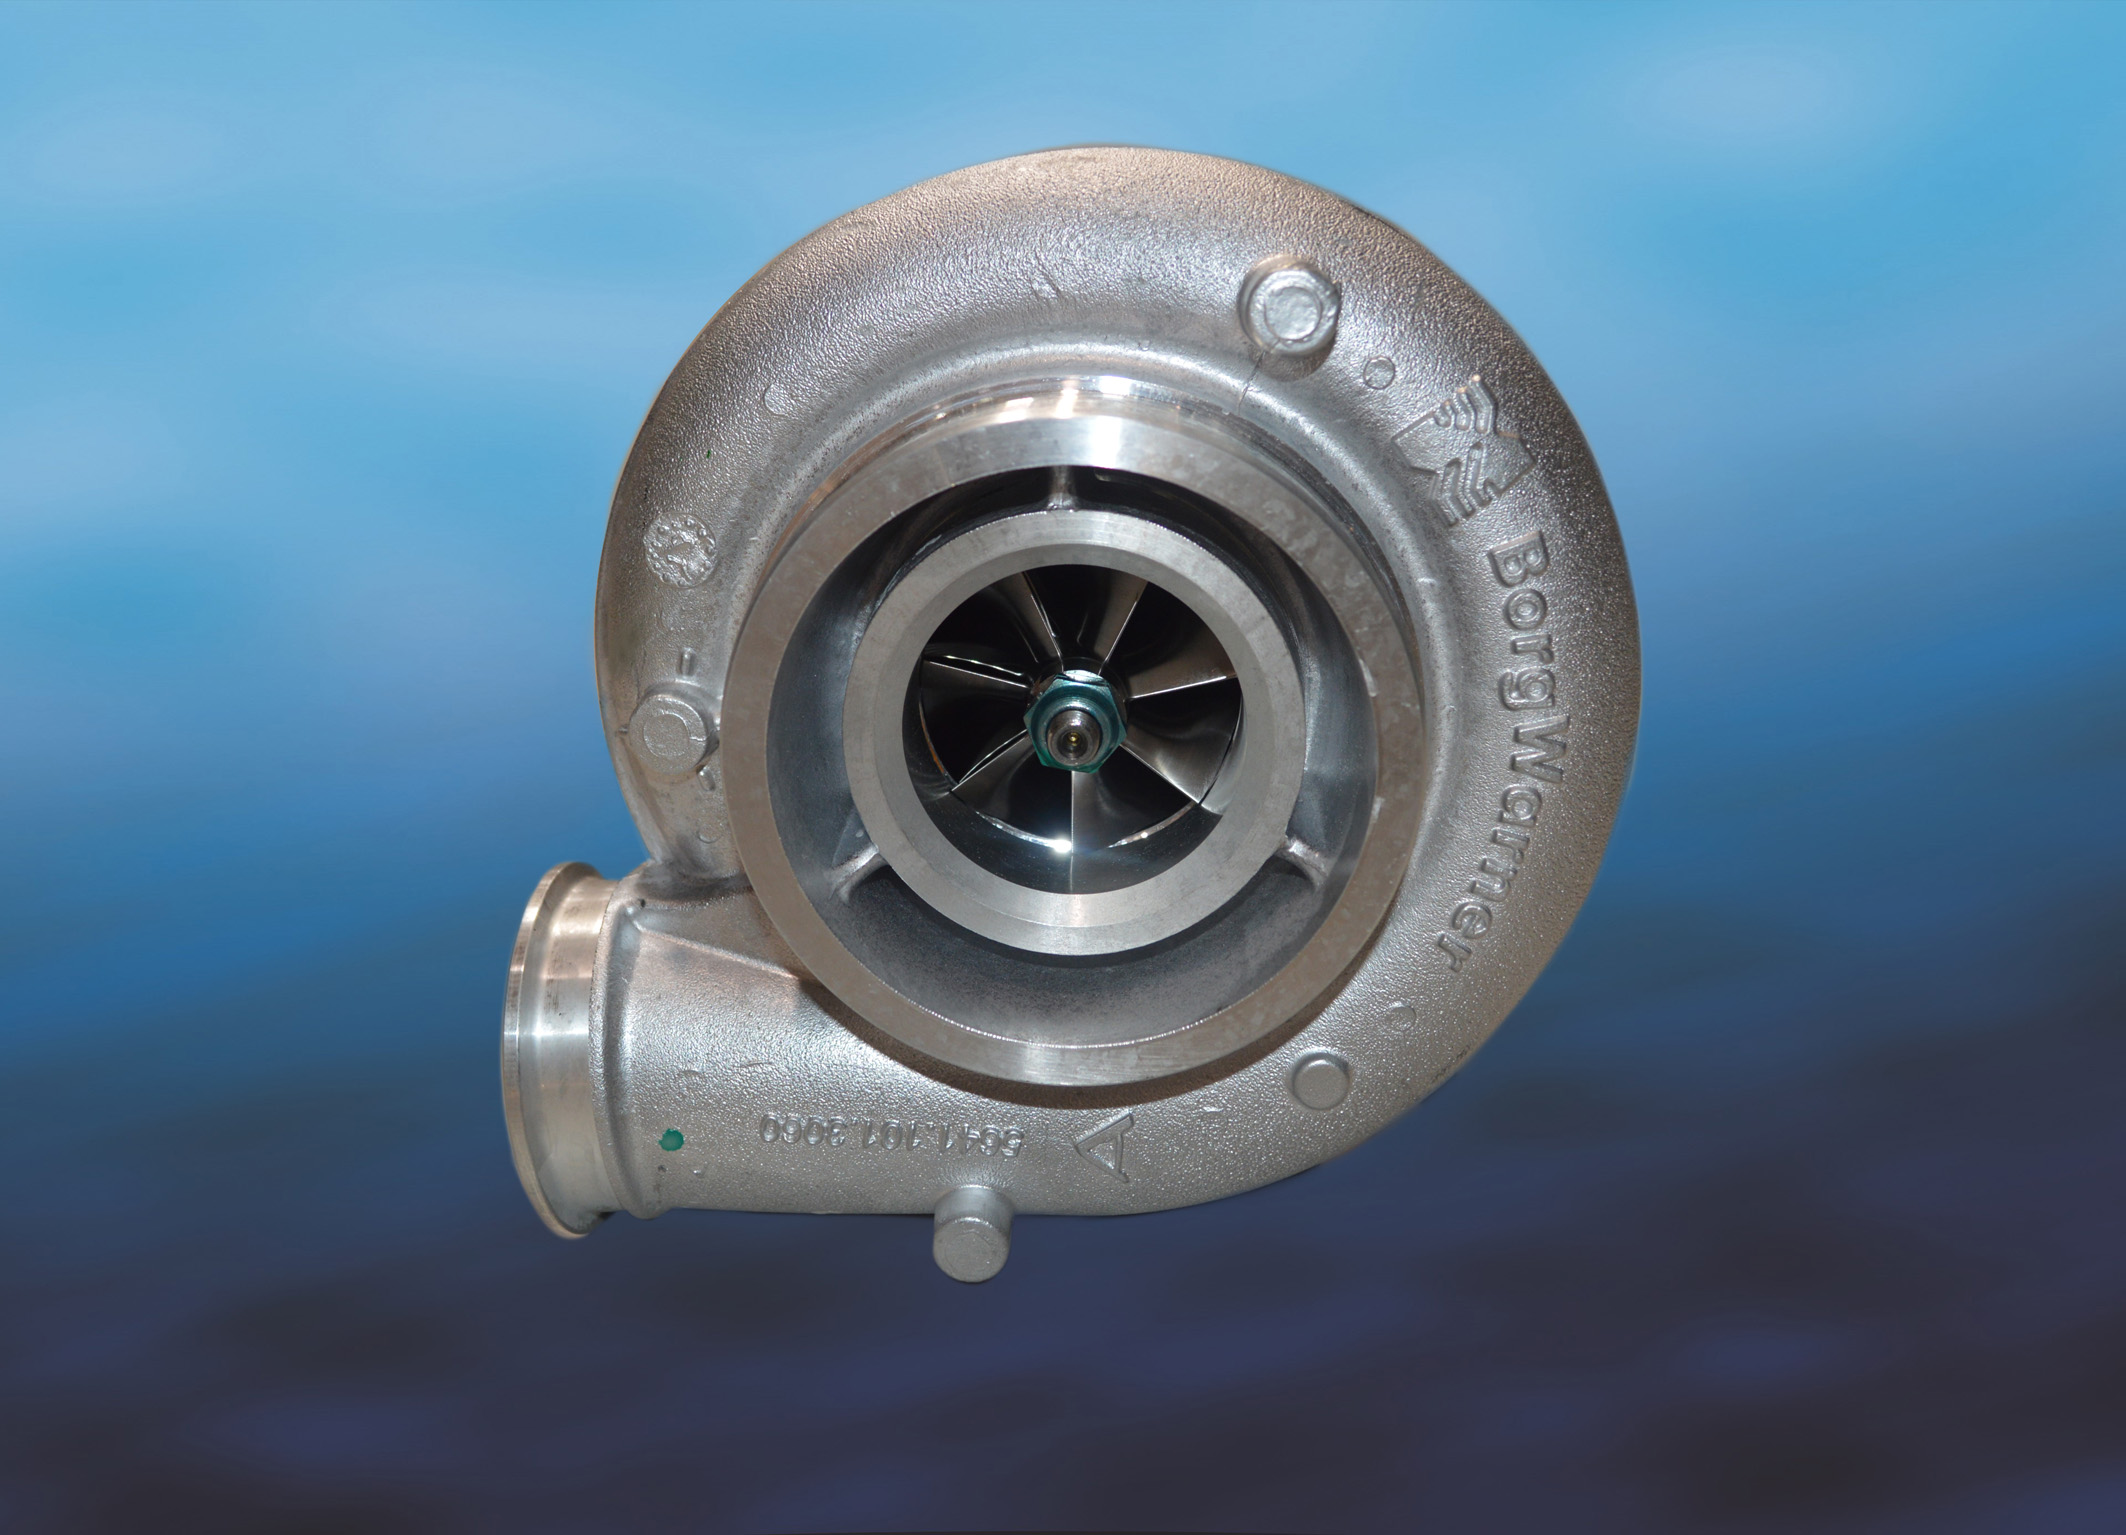 BorgWarner’s S-Series turbochargers deliver proven performance and durability for Mercedes-Benz Actros heavy-duty trucks, now with engines made in Brazil. 